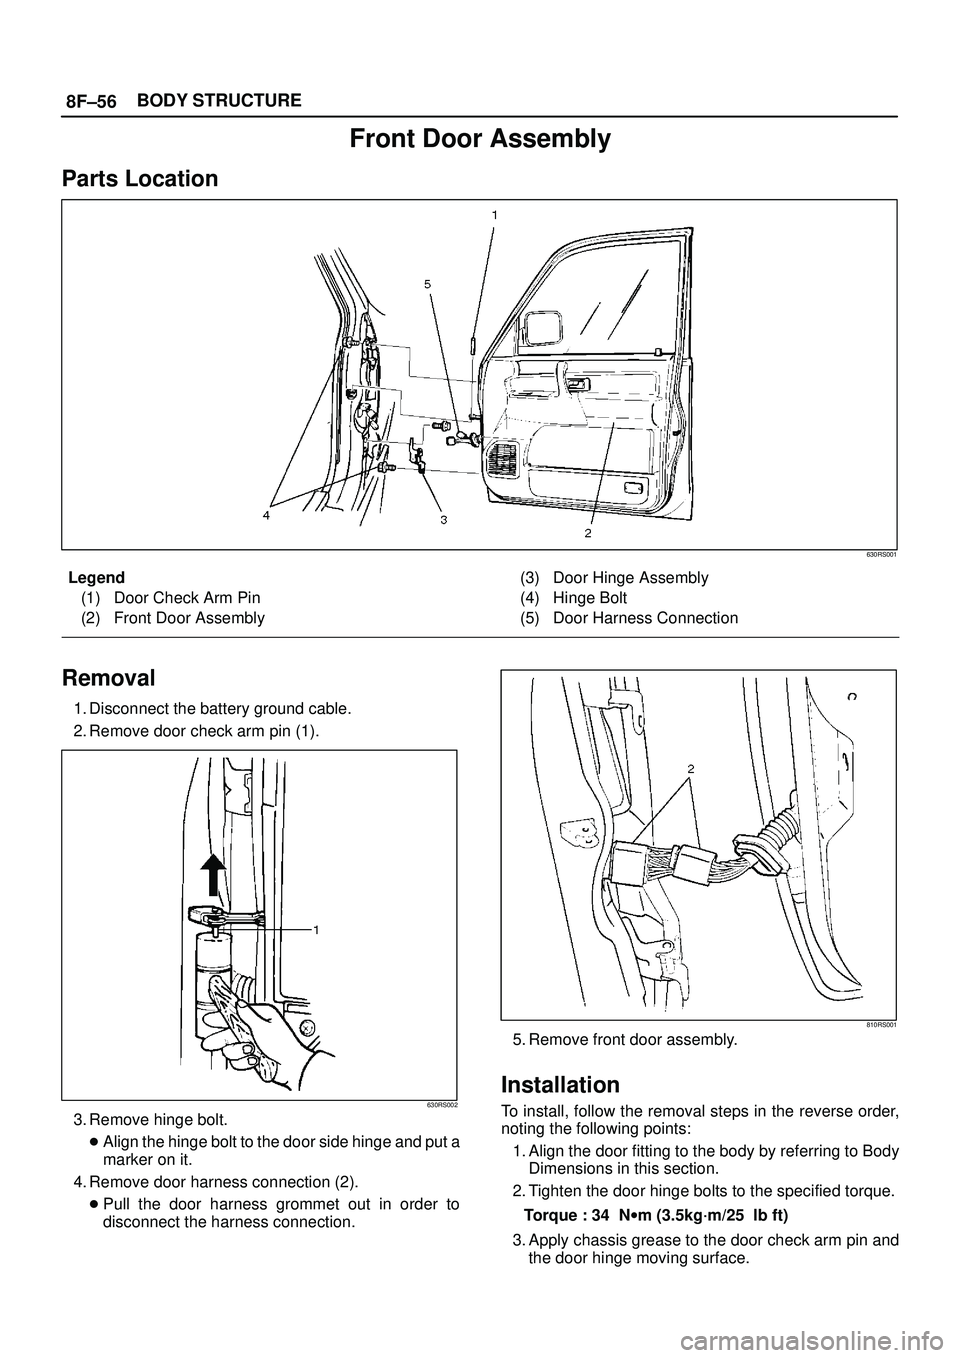 ISUZU TROOPER 1998  Service Repair Manual 8F±56BODY STRUCTURE
Front Door Assembly
Parts Location
630RS001
Legend
(1) Door Check Arm Pin
(2) Front Door Assembly(3) Door Hinge Assembly
(4) Hinge Bolt
(5) Door Harness Connection
Removal
1. Disc